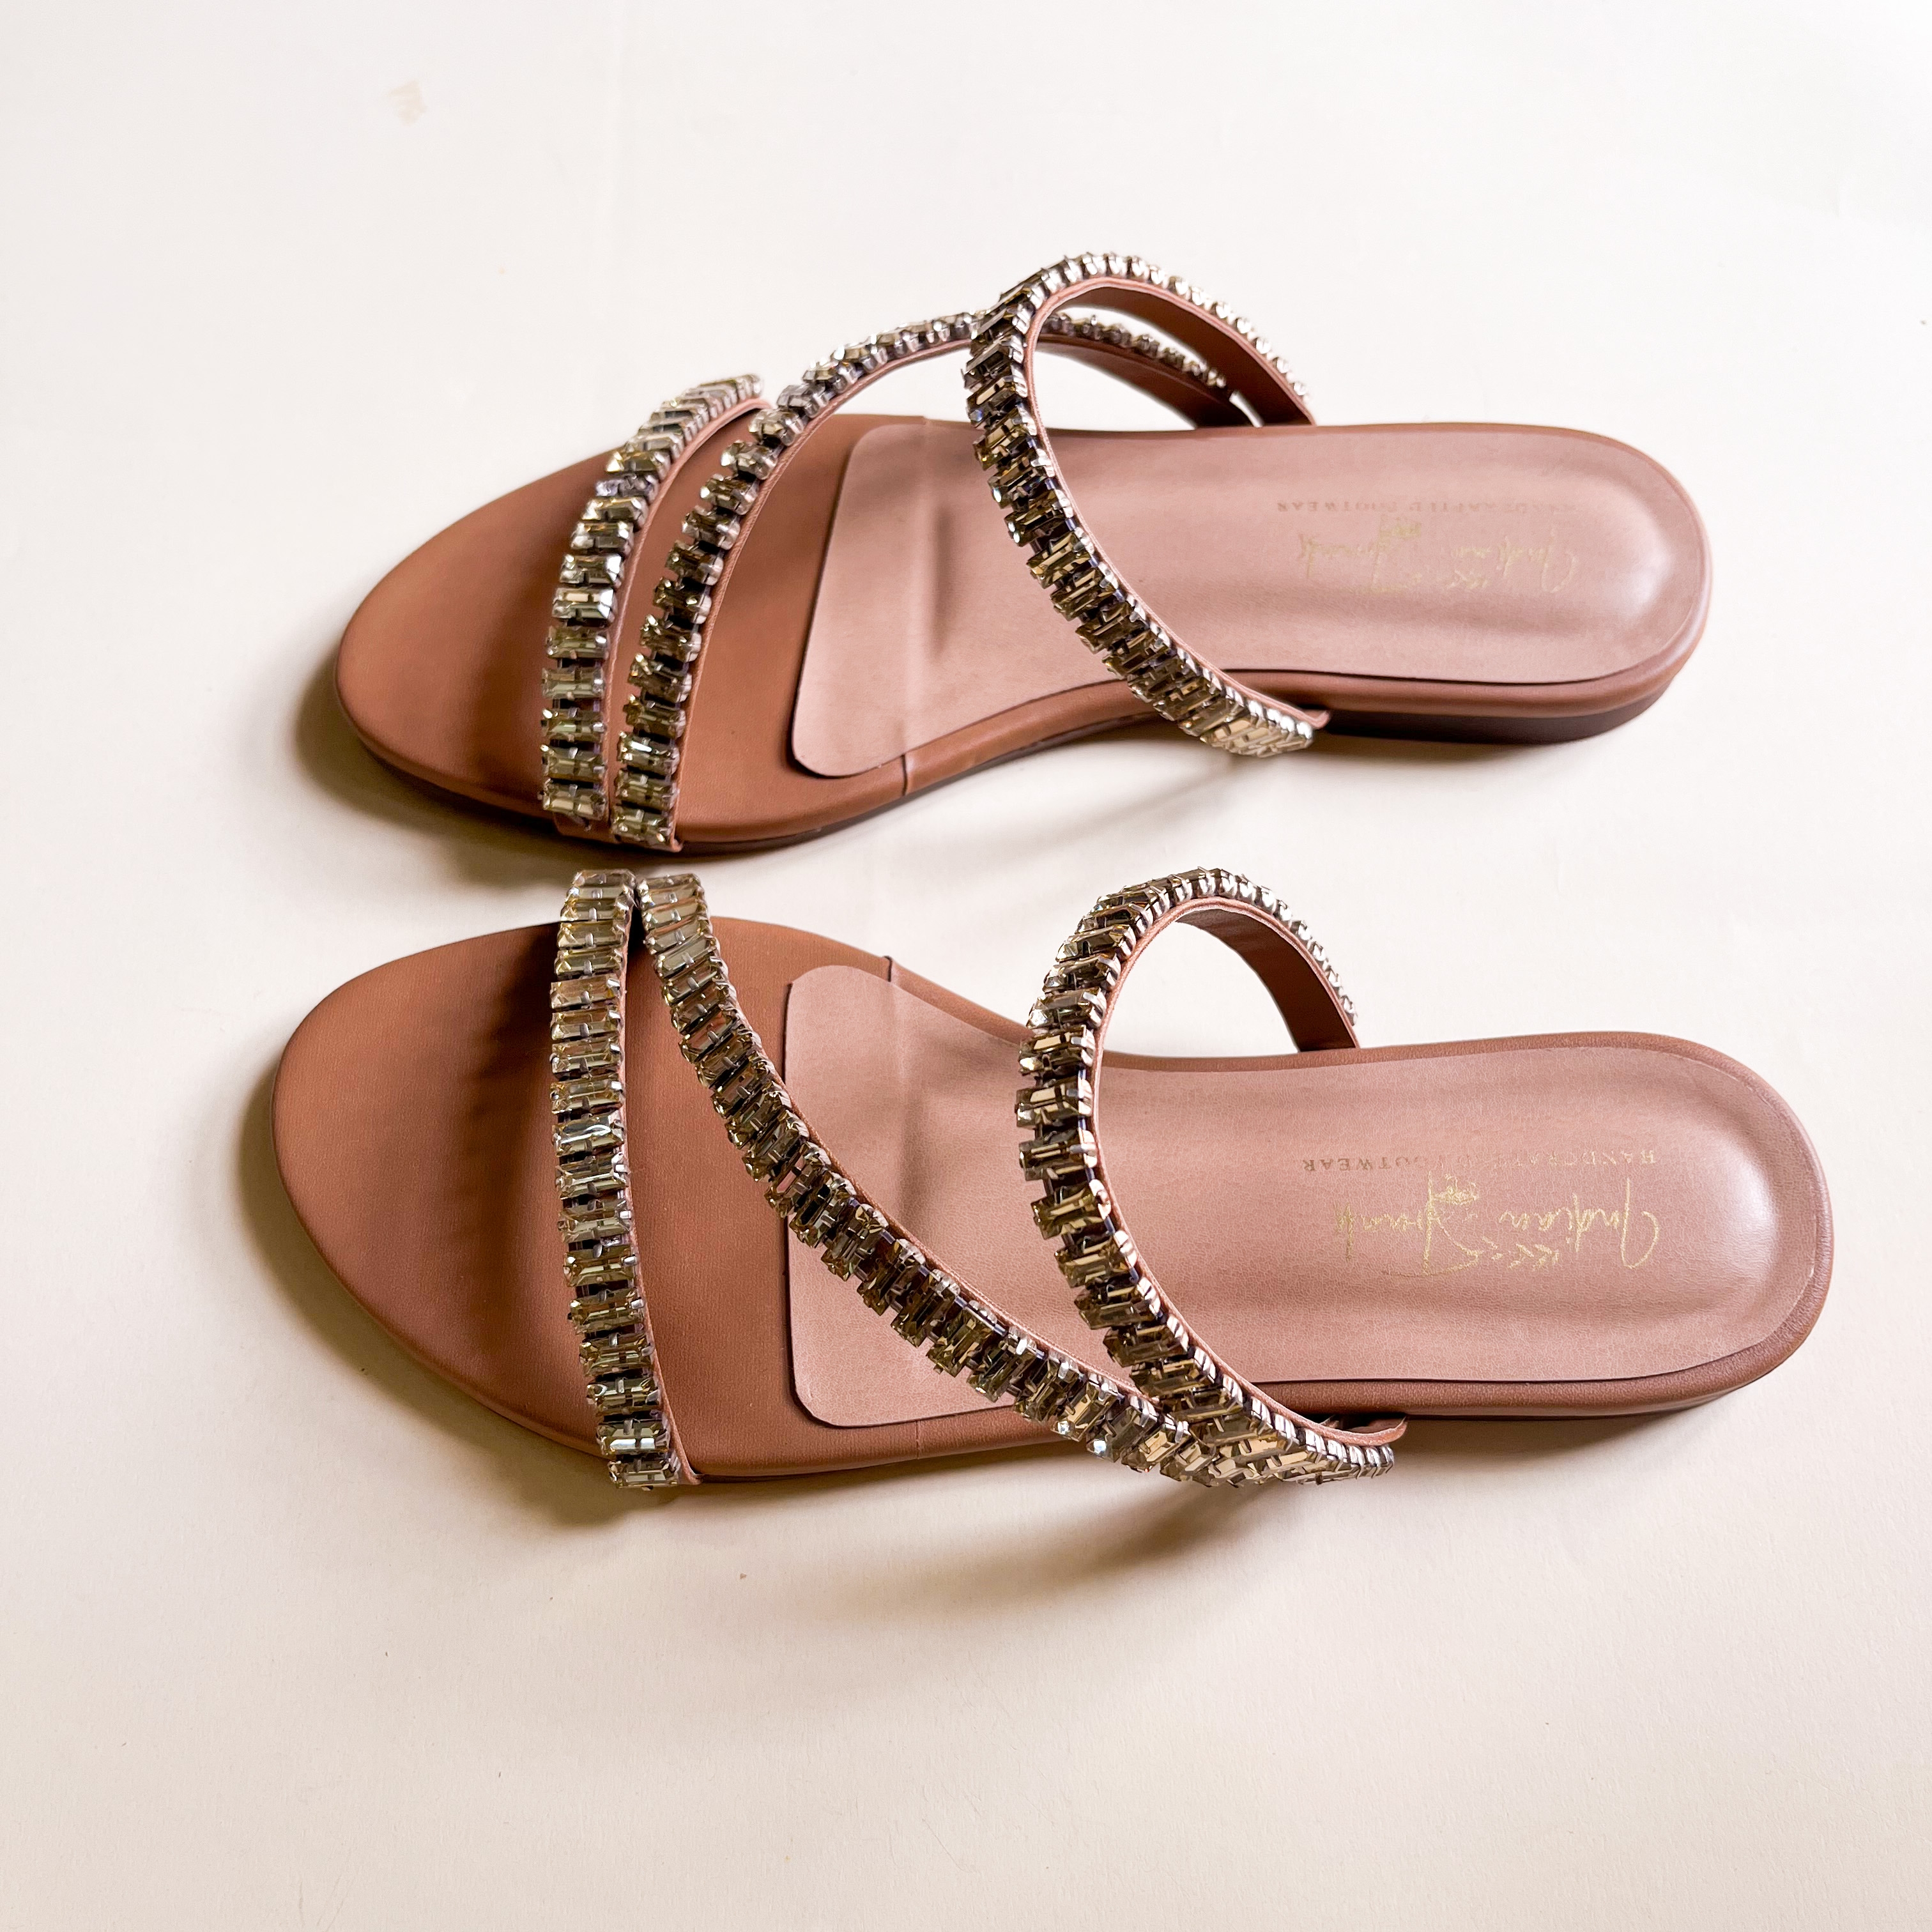 Tom Ford Mirror Leather And Crystal Stones Pointy Jewel Sandal  Review#shorts - YouTube